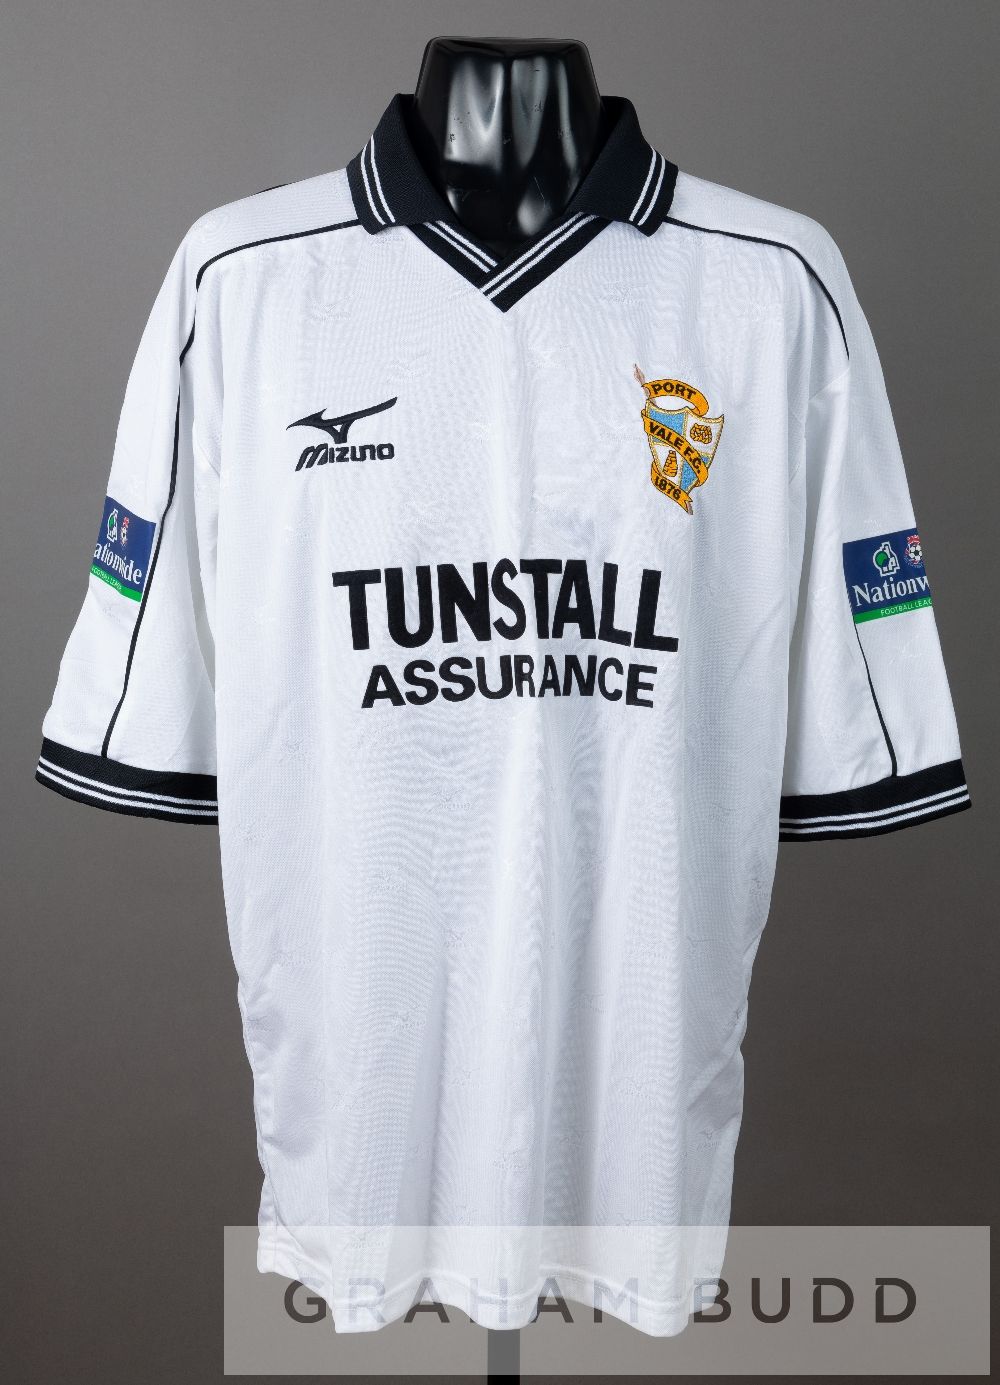 Tony Rougier white and black Port Vale no.17 jersey, season 1999-2000, by Mizuno, short-sleeved with - Image 2 of 2